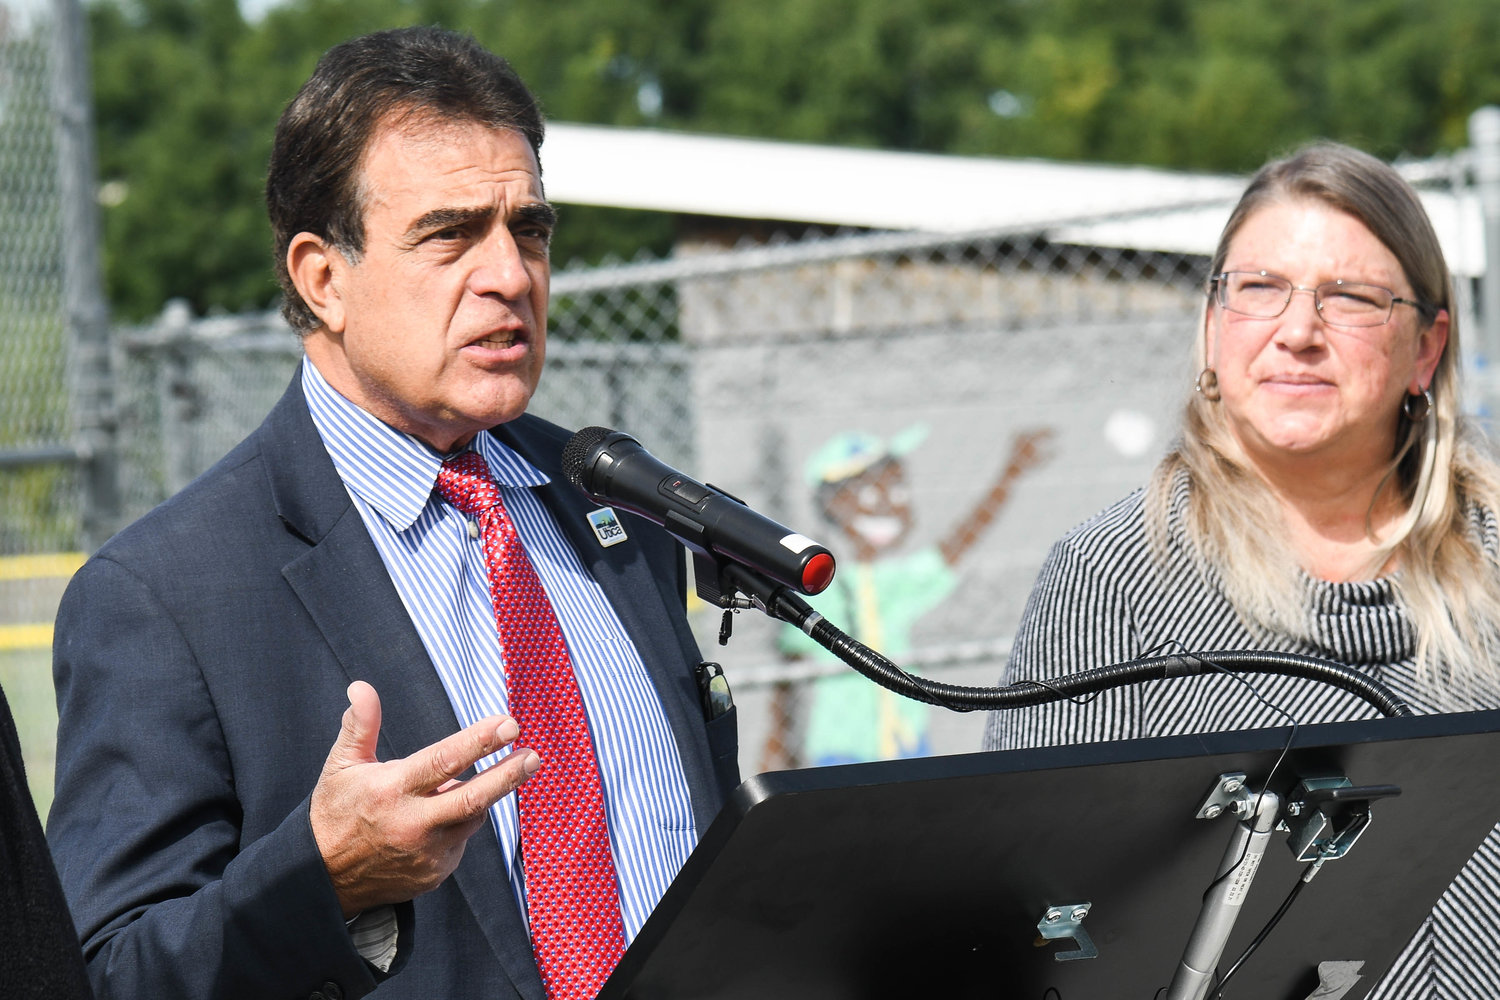 Utica Mayor Robert Palmieri speaks during an announcement for park accessibility and improvements on Monday, Oct. 3 at Wankel Park in South Utica.